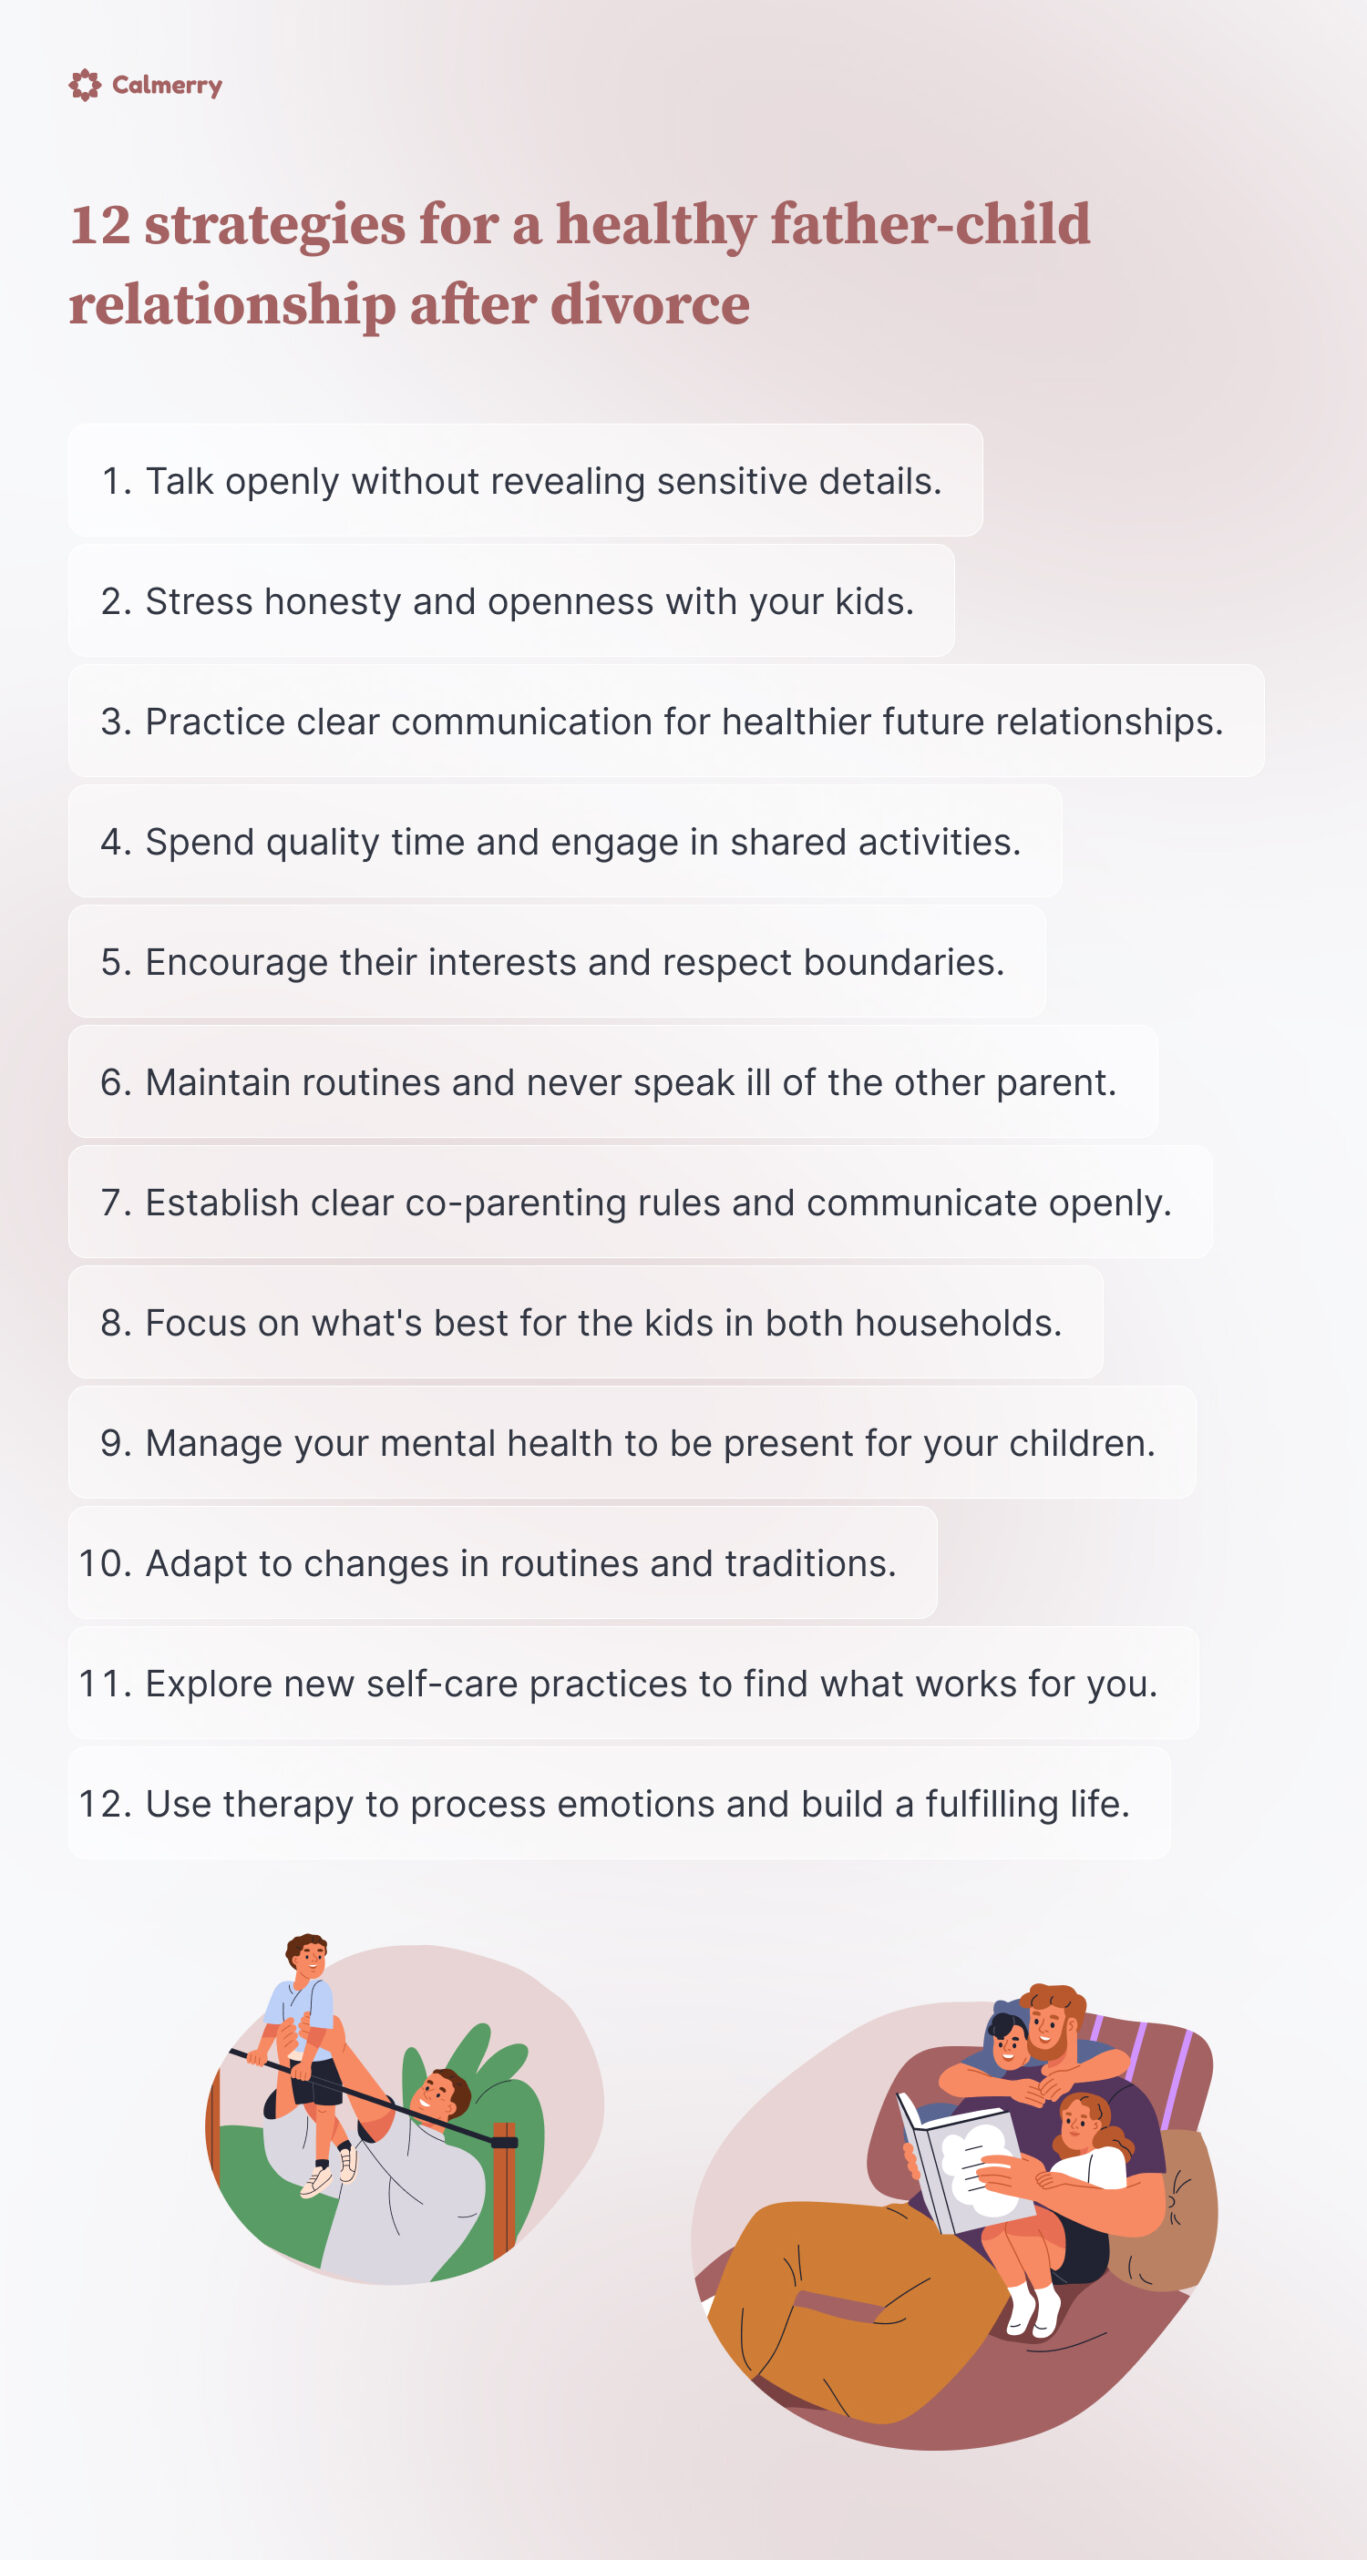 12 strategies for a healthy father-child relationship after divorce
Talk openly without revealing sensitive details.
Stress honesty and openness with your kids.
Practice clear communication for healthier future relationships.
Spend quality time and engage in shared activities.
Encourage their interests and respect boundaries.
Maintain routines and never speak ill of the other parent.
Establish clear co-parenting rules and communicate openly.
Focus on what's best for the kids in both households.
Manage your mental health to be present for your children.
Adapt to changes in routines and traditions.
Explore new self-care practices to find what works for you.
Use therapy to process emotions and build a fulfilling life.
